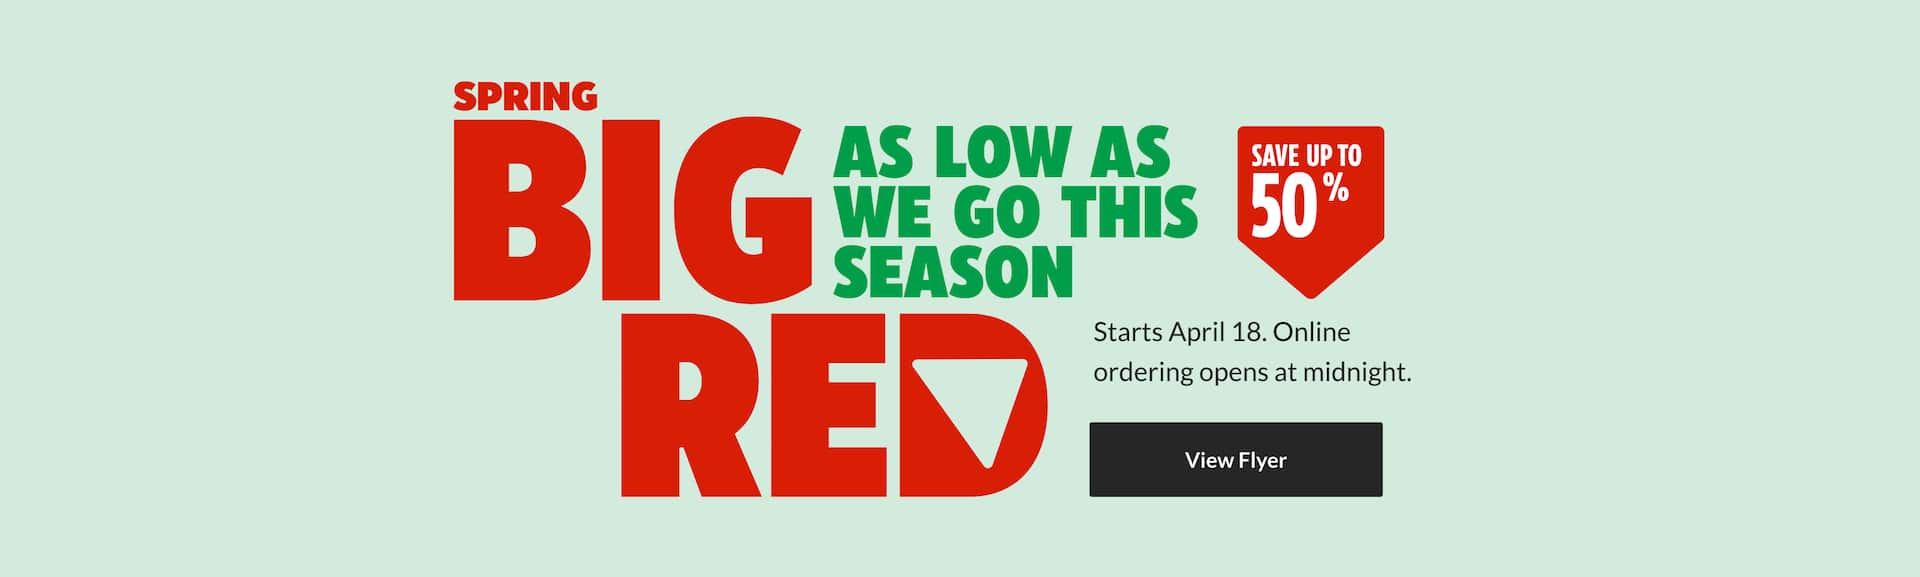 Preview our Spring Big Red Event flyer  